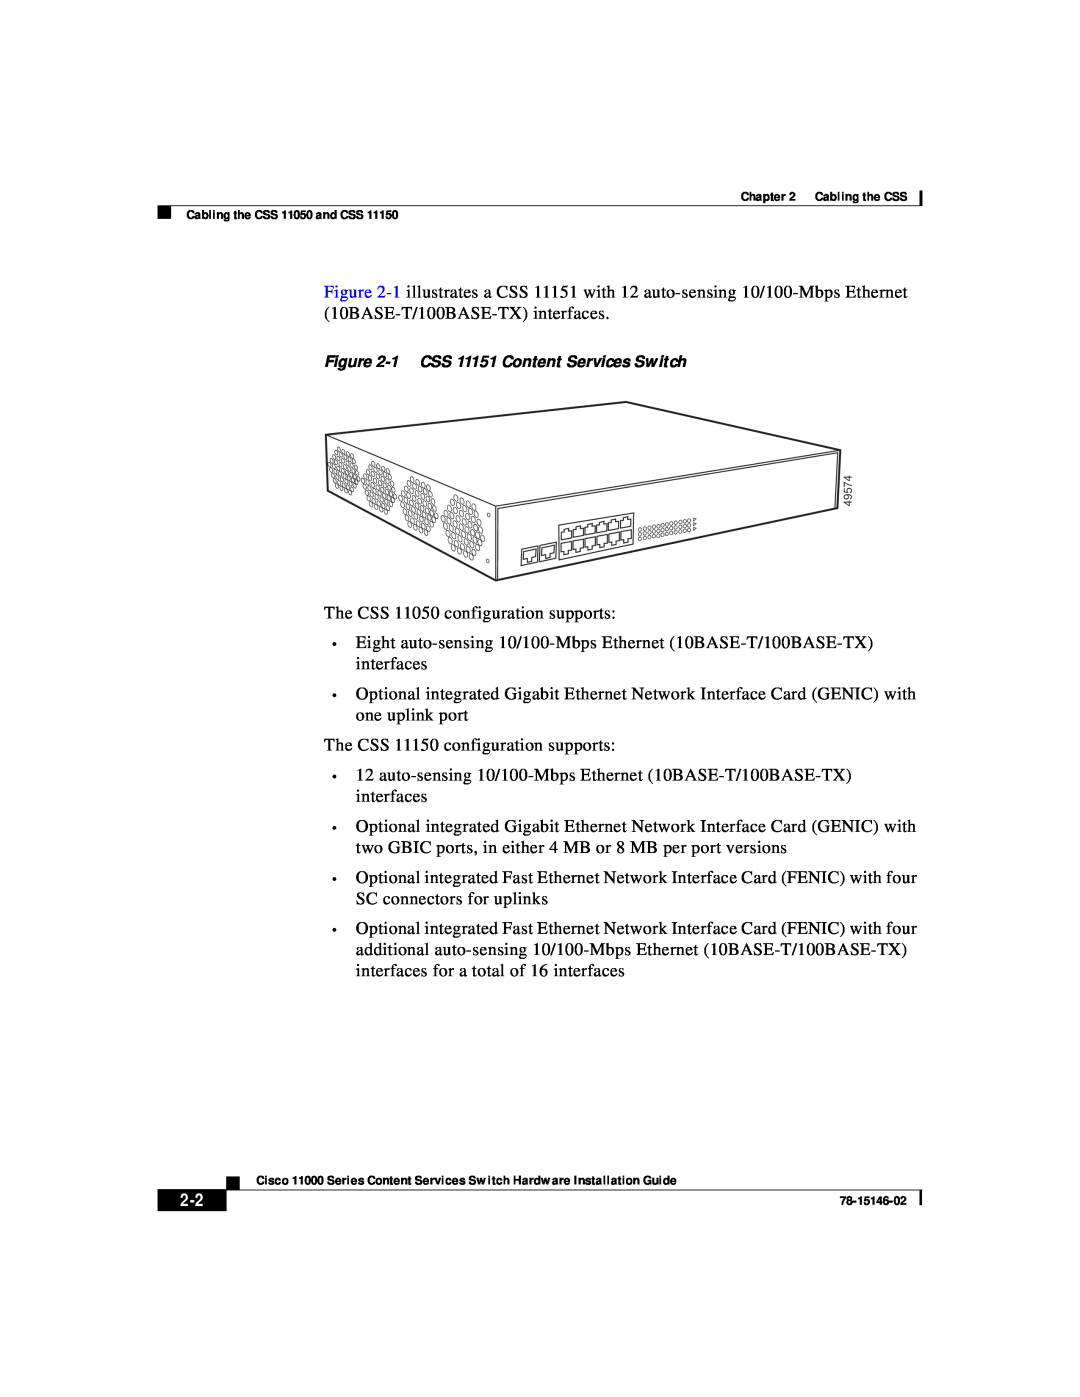 Cisco Systems 11000 Series manual The CSS 11050 configuration supports 